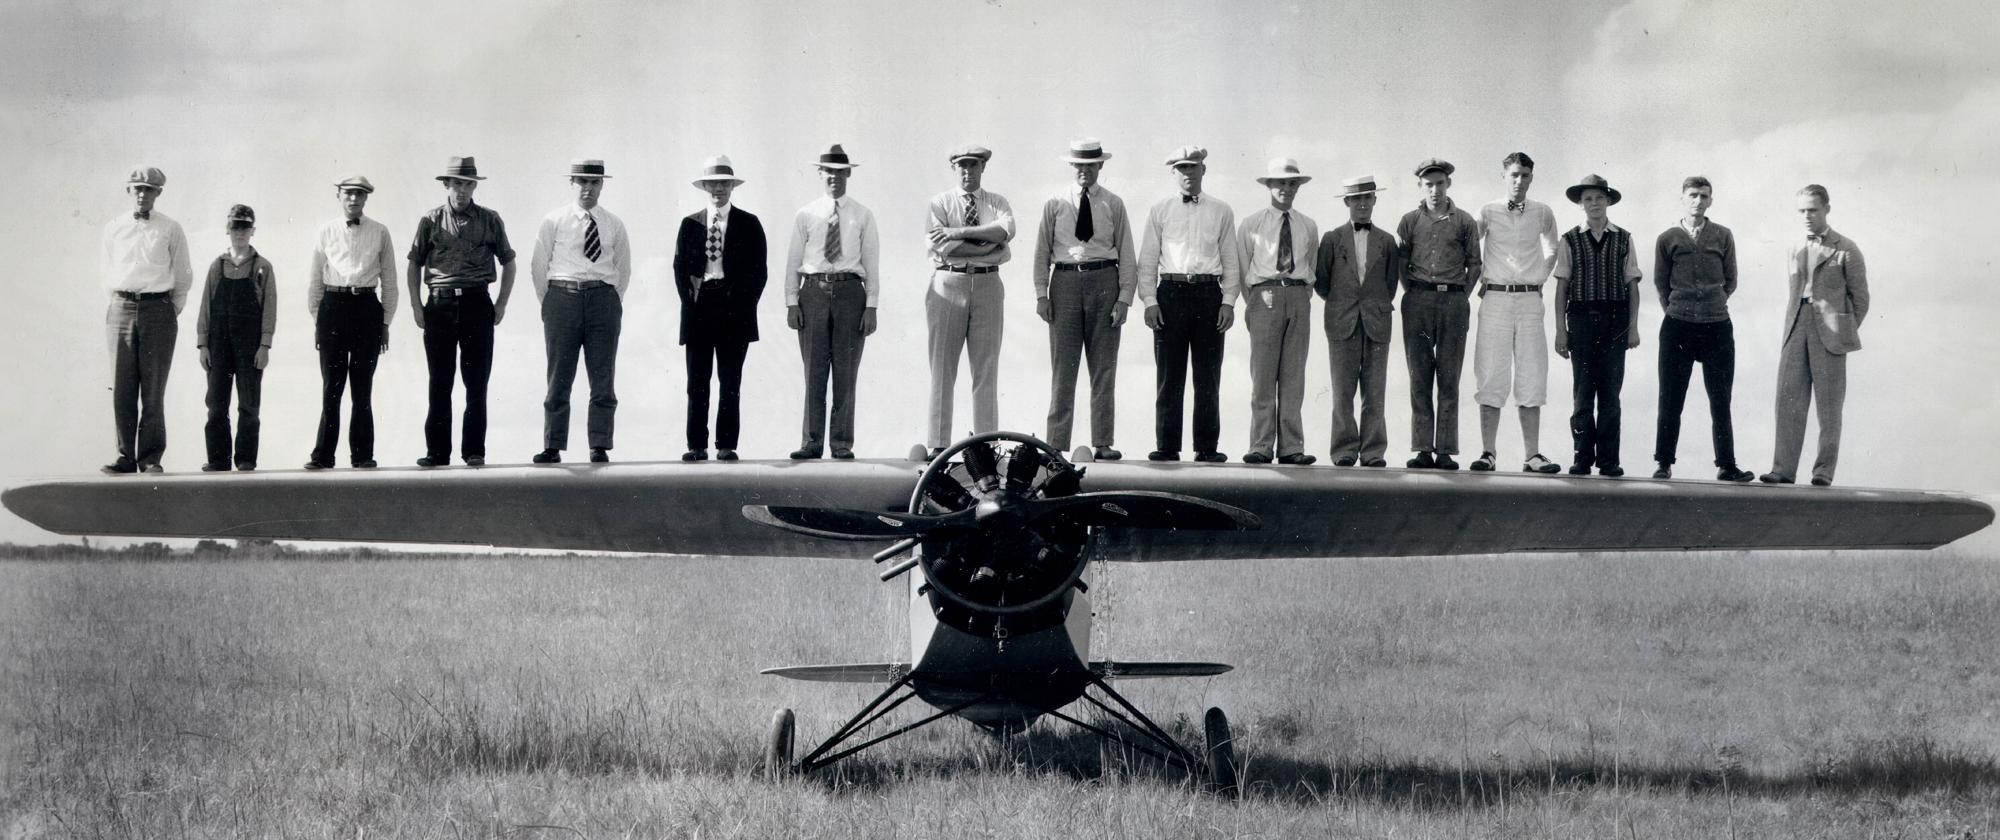 historic photo of men standing on propeller aircraft in Wichita Kansas, Air Capital of the World